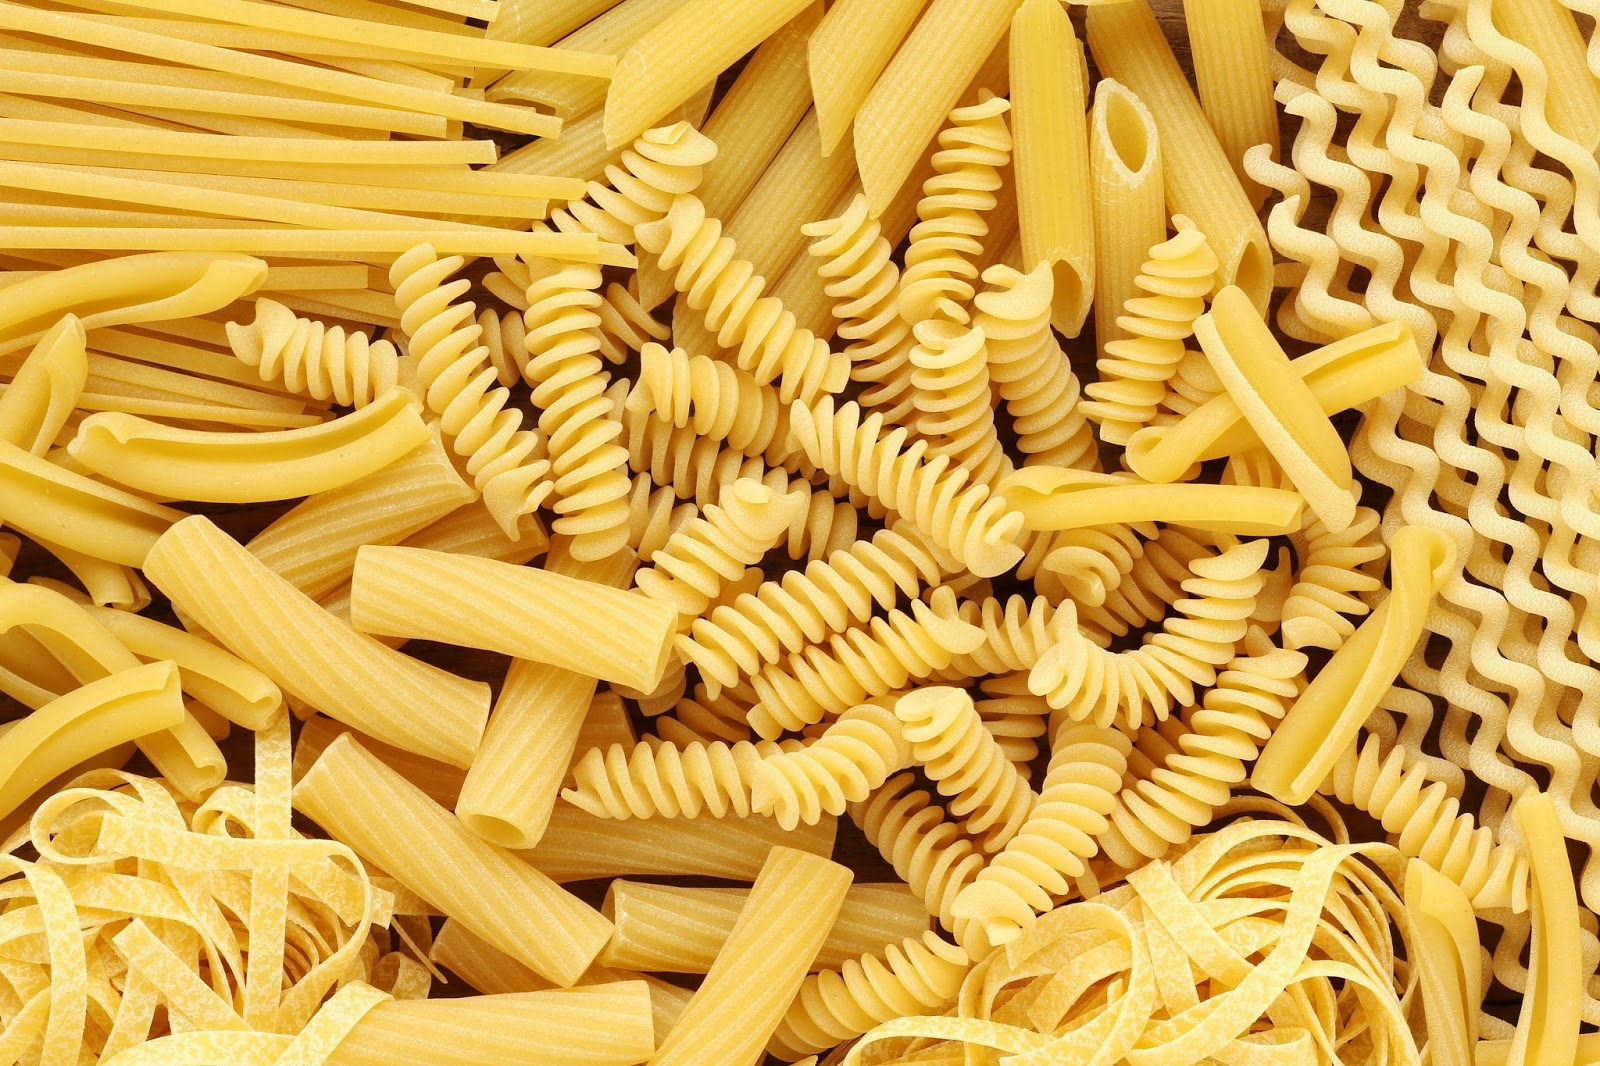 The Loud Mouth Italian: Noodles or Pasta?